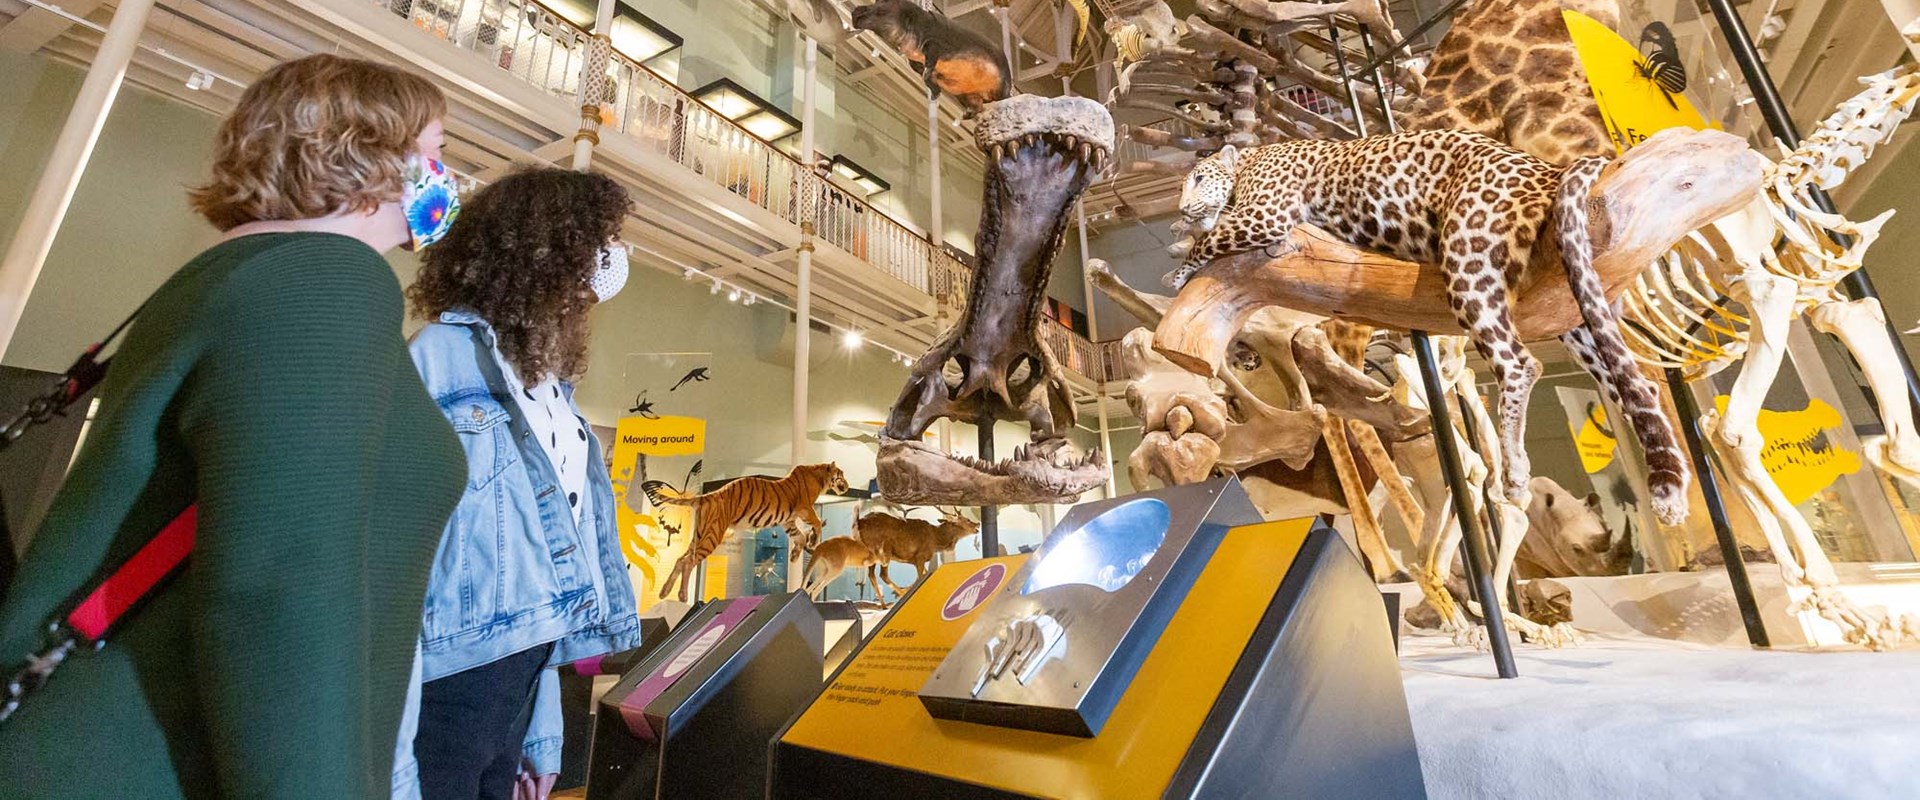 Top 10 things to see and do | National Museum of Scotland